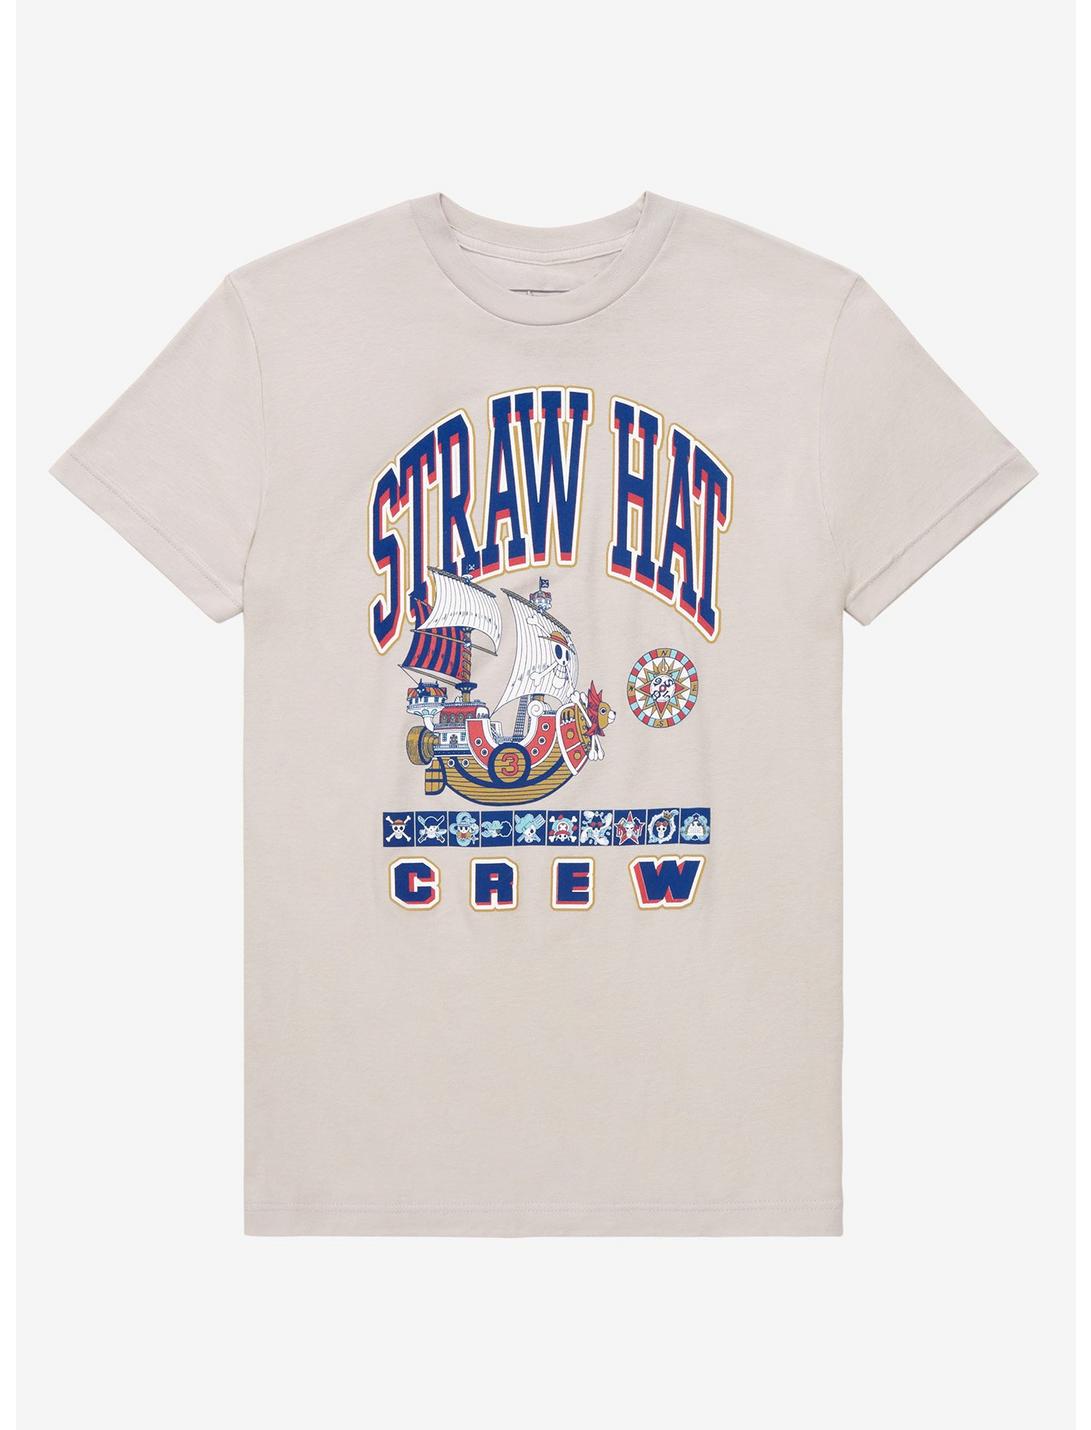 One Piece Straw Hat Crew Thousand Sunny T-Shirt - BoxLunch Exclusive, SILVER, hi-res